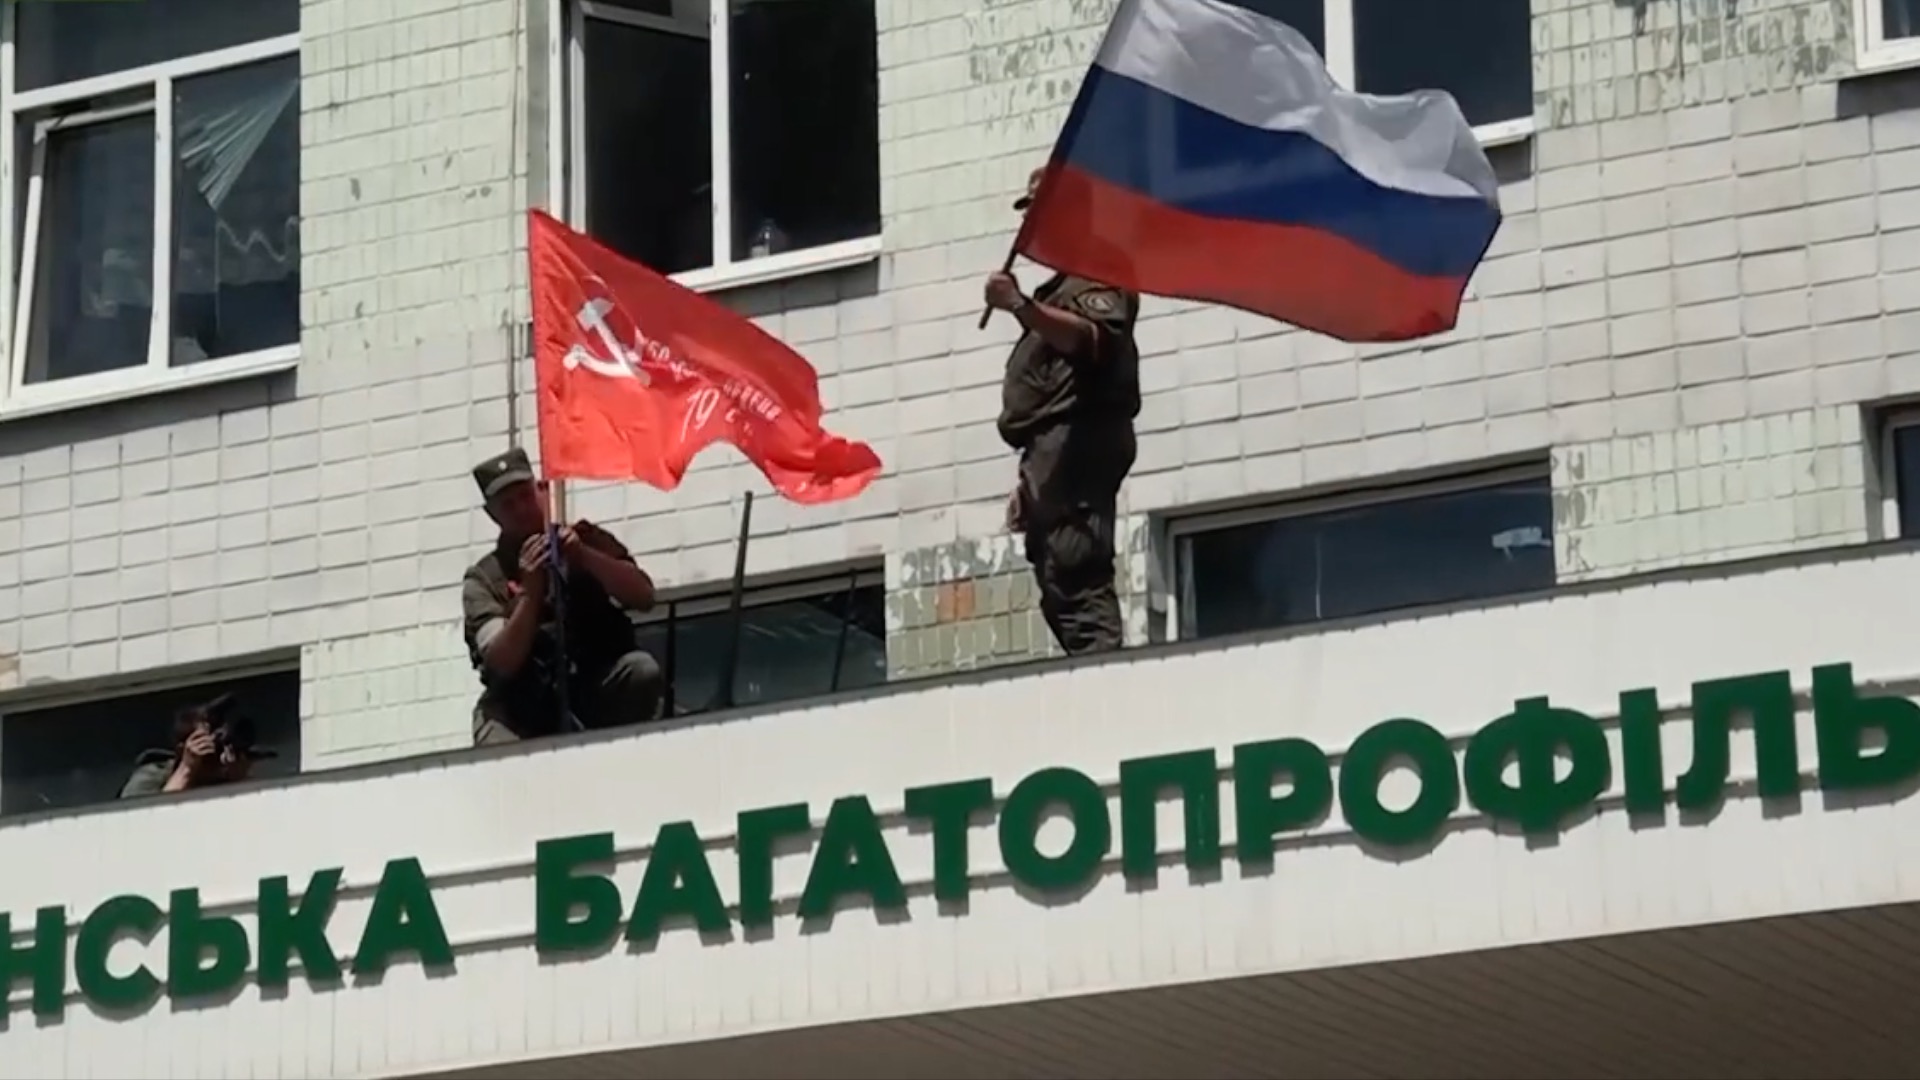 This image released by the People's Militia of the Luhansk People's Republic on July 3, shows their forces with Soviet and Russian national flags on a government building as they capture the city of Lysychansk, in the Luhansk region of eastern Ukraine.